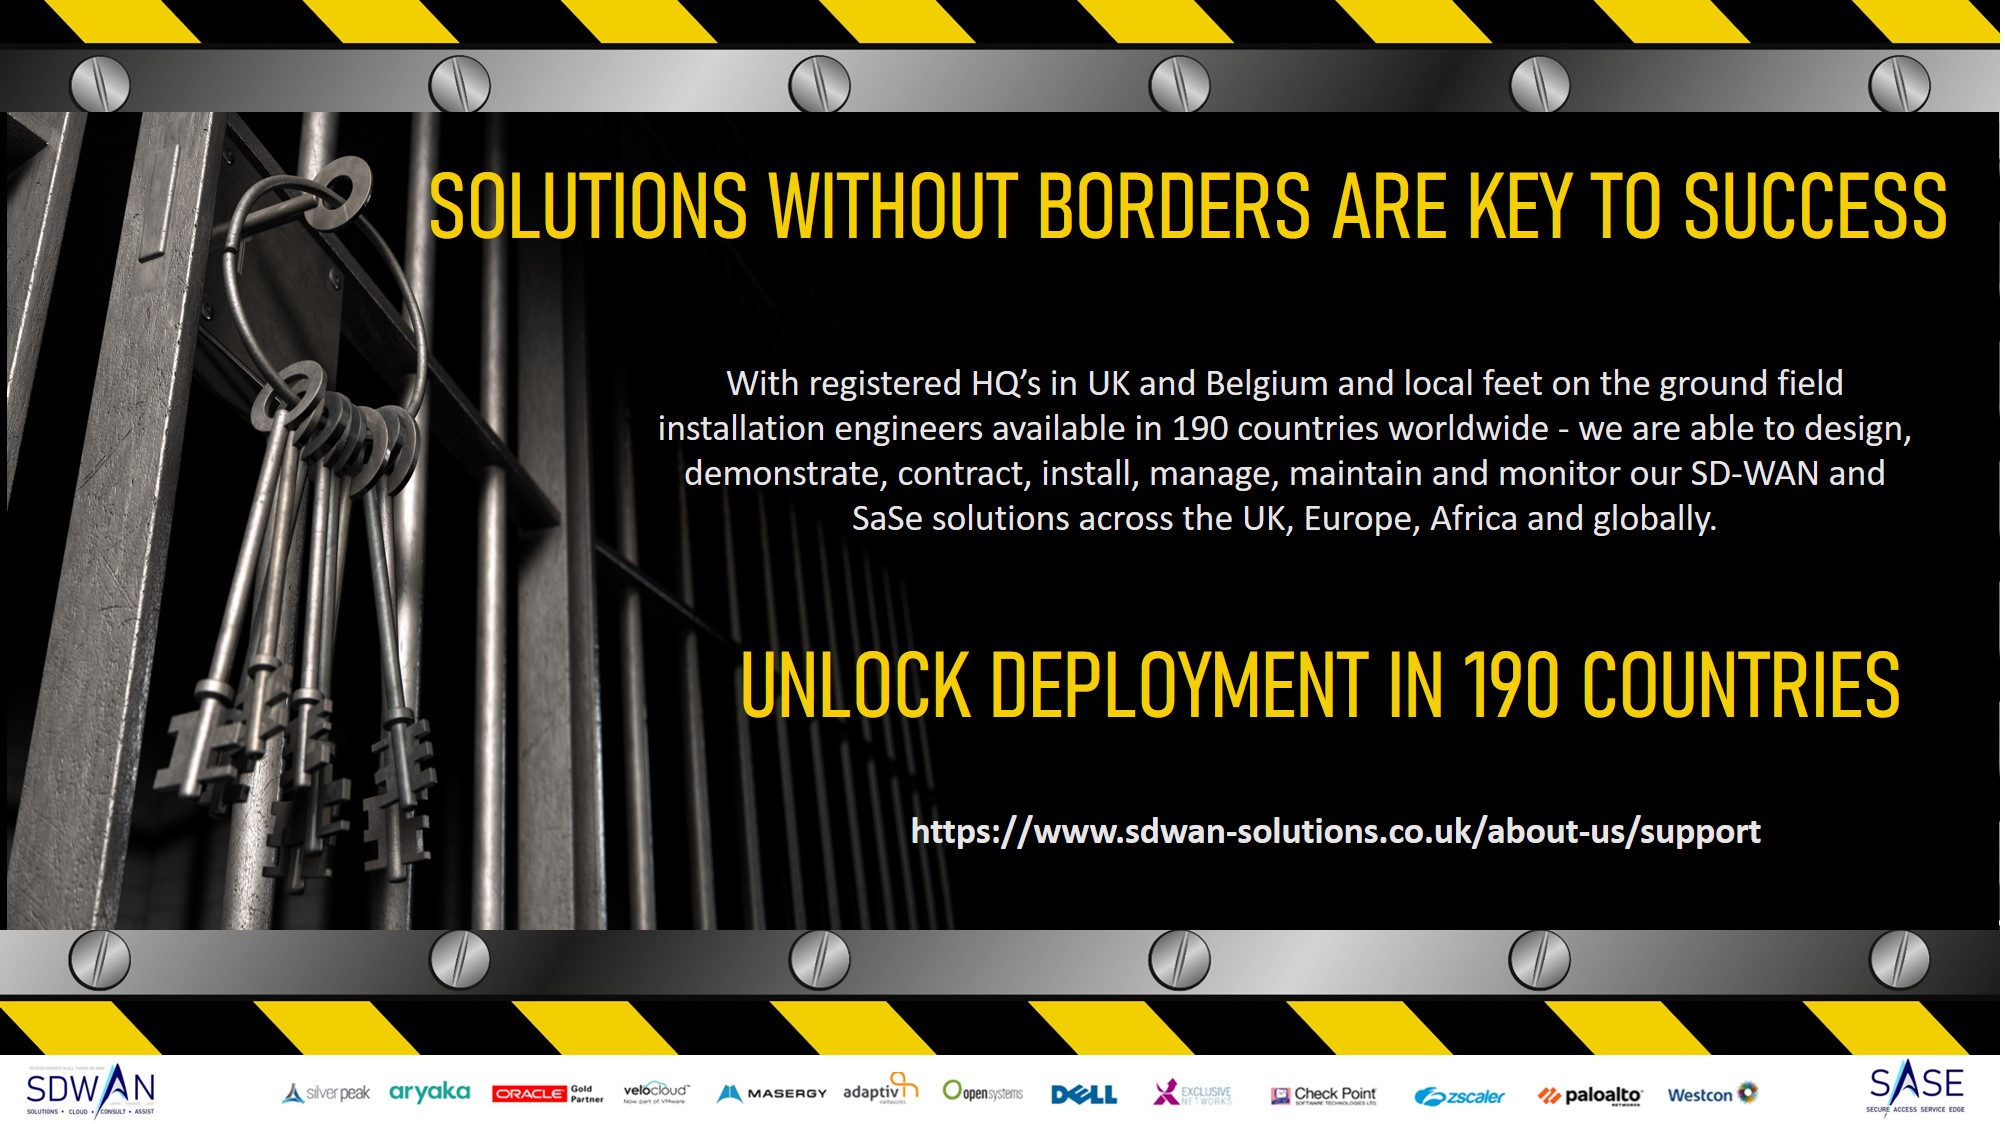 Solutions without borders unlock deployment in 190 countries